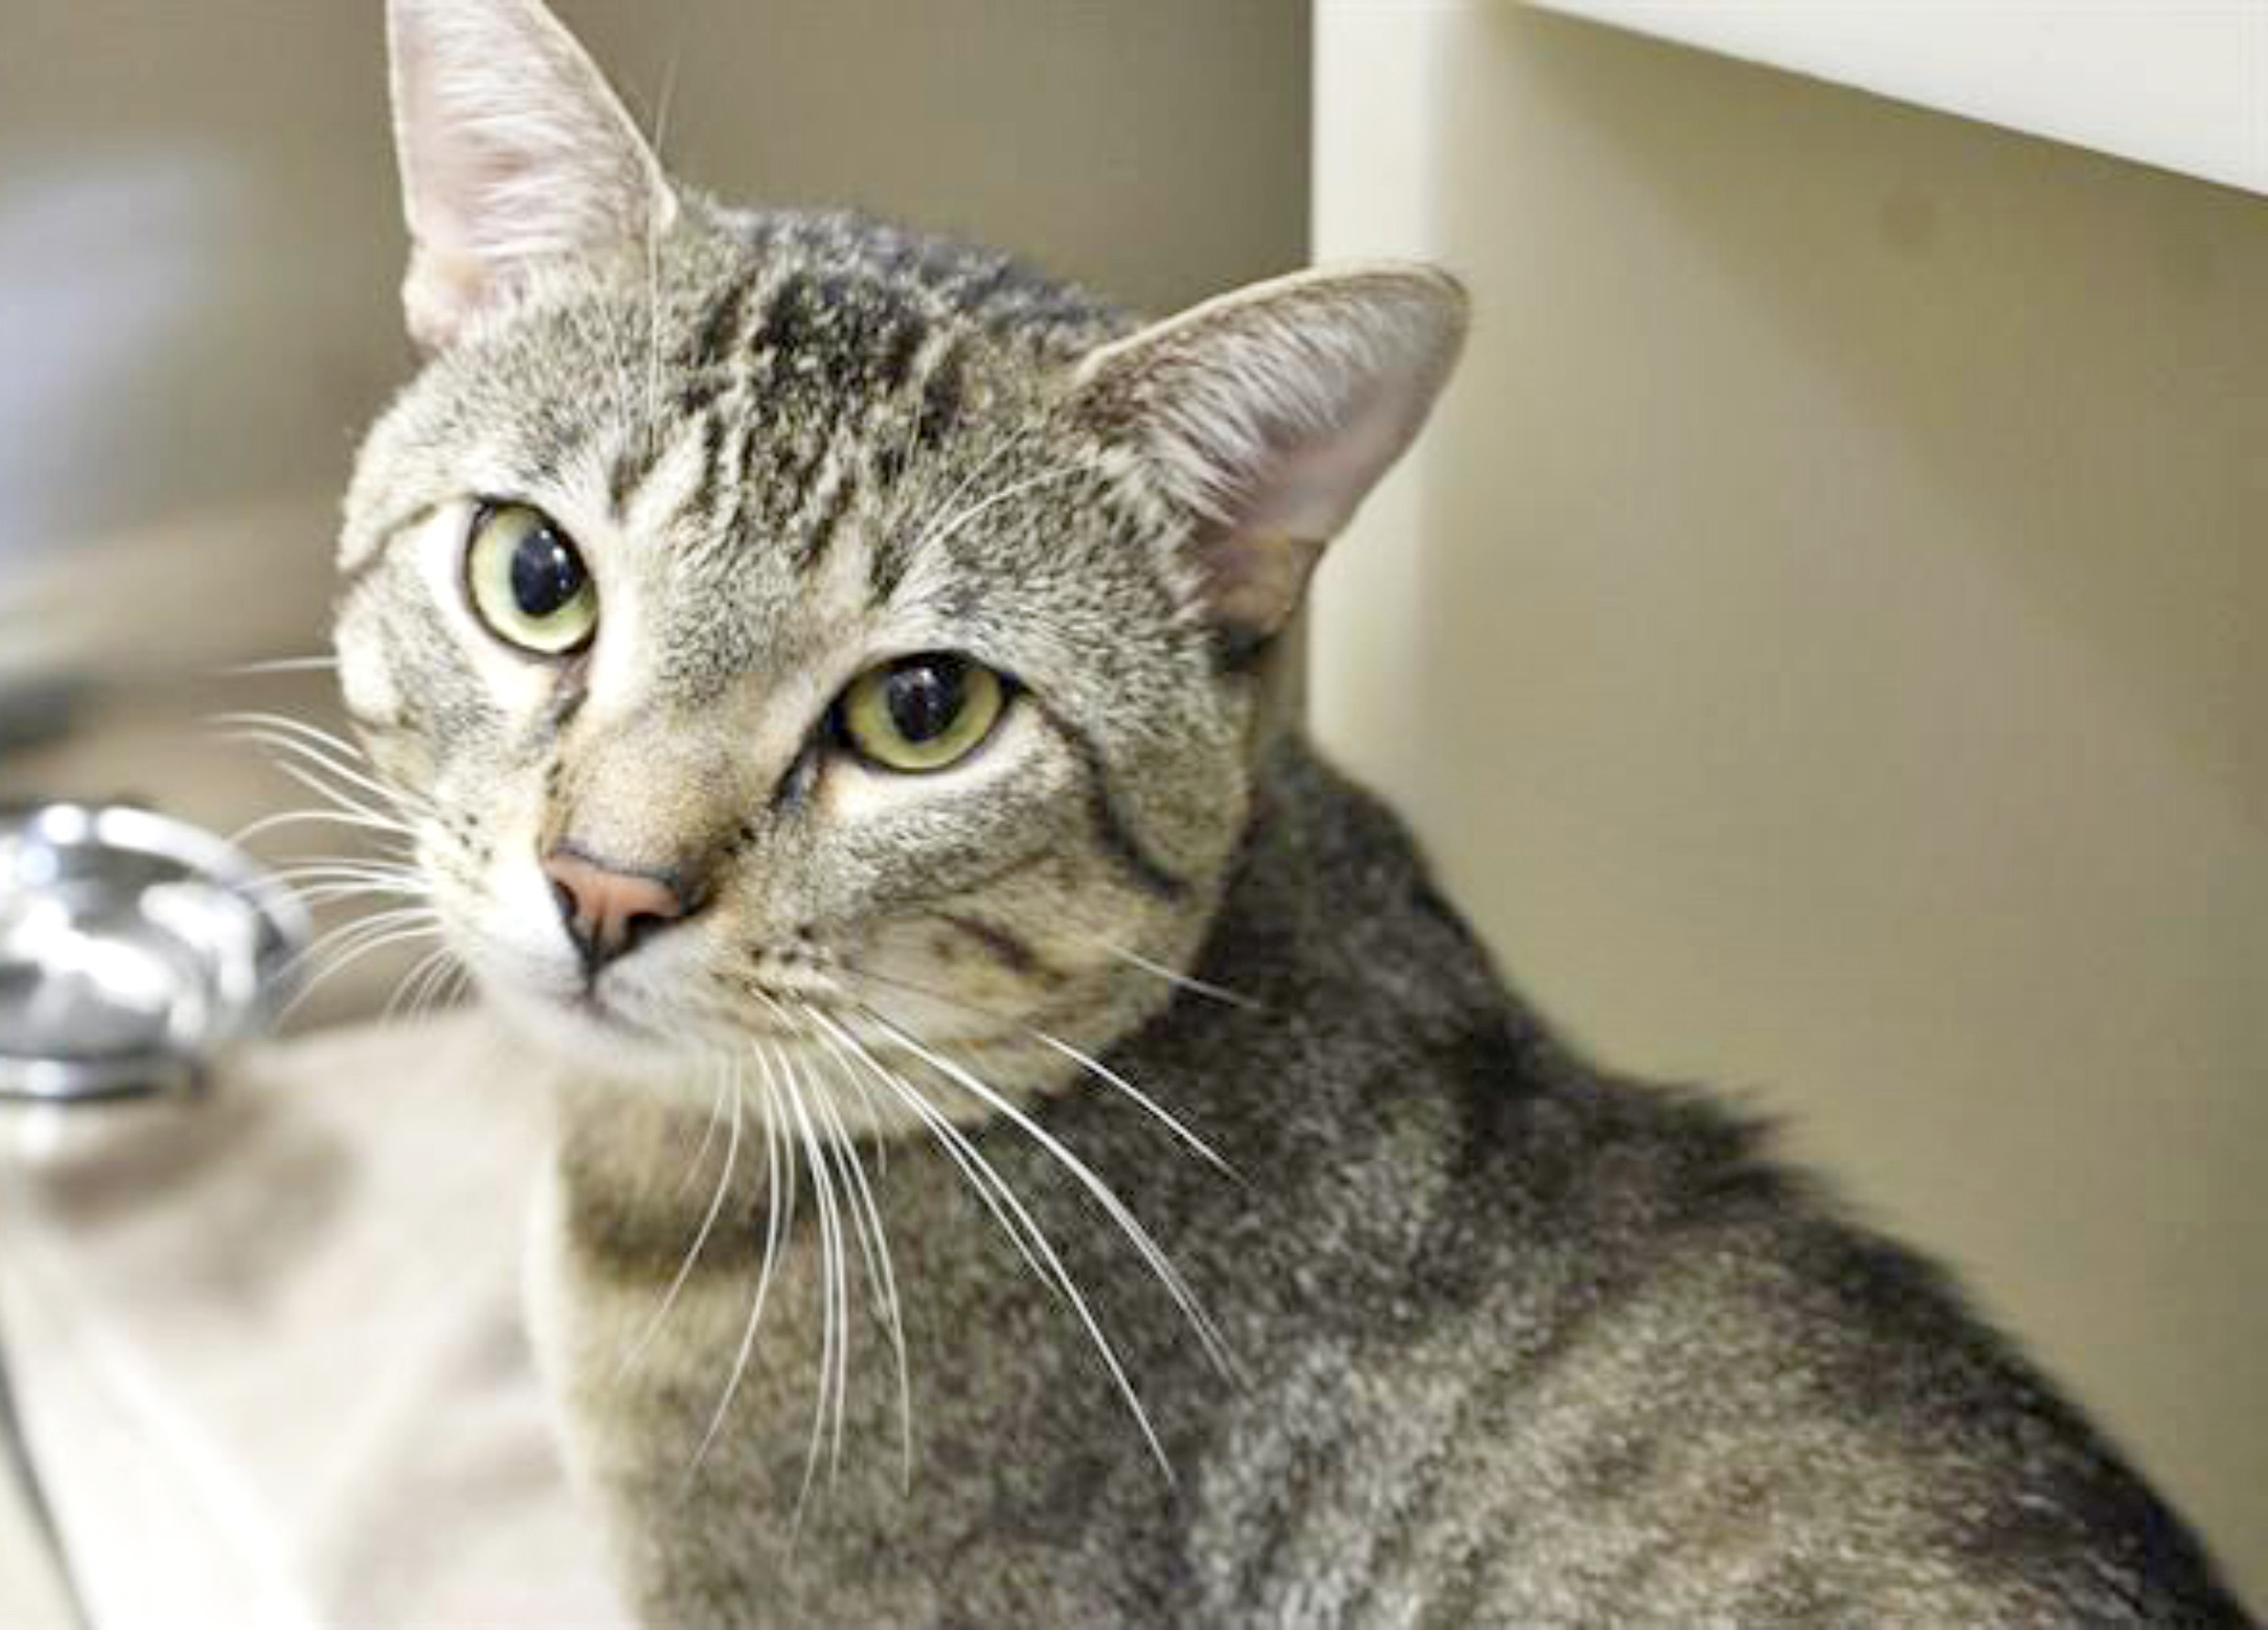 Humane Society – Pet of the Week — Hi there, I’m Corporal Scotch Mcloskey (1595615). I am a 1-year-old brown tiger and white Domestic Shorthair cat that came into HSPPR as a stray and now I’m waiting for my new family. HSPPR staff and volunteers call me a social boy because, even if I’m taking a cat nap, I’ll jump up to come say “hello.” I LOVE attention so much that I’ll lean into your hand and headbutt you for more pets. I’m currently in a Cat Colony room where I hang out with people and other cats. My adoption is $100, and I come with a voucher for a veterinary exam, vaccinations, 30 days of pet health insurance, a microchip, and I am already neutered. Just ask for Corporal Scotch Mcloskey (1595615). Humane Society: 719-473-1741, 610 Abbot Lane. Call for hours. www.hsppr.org.